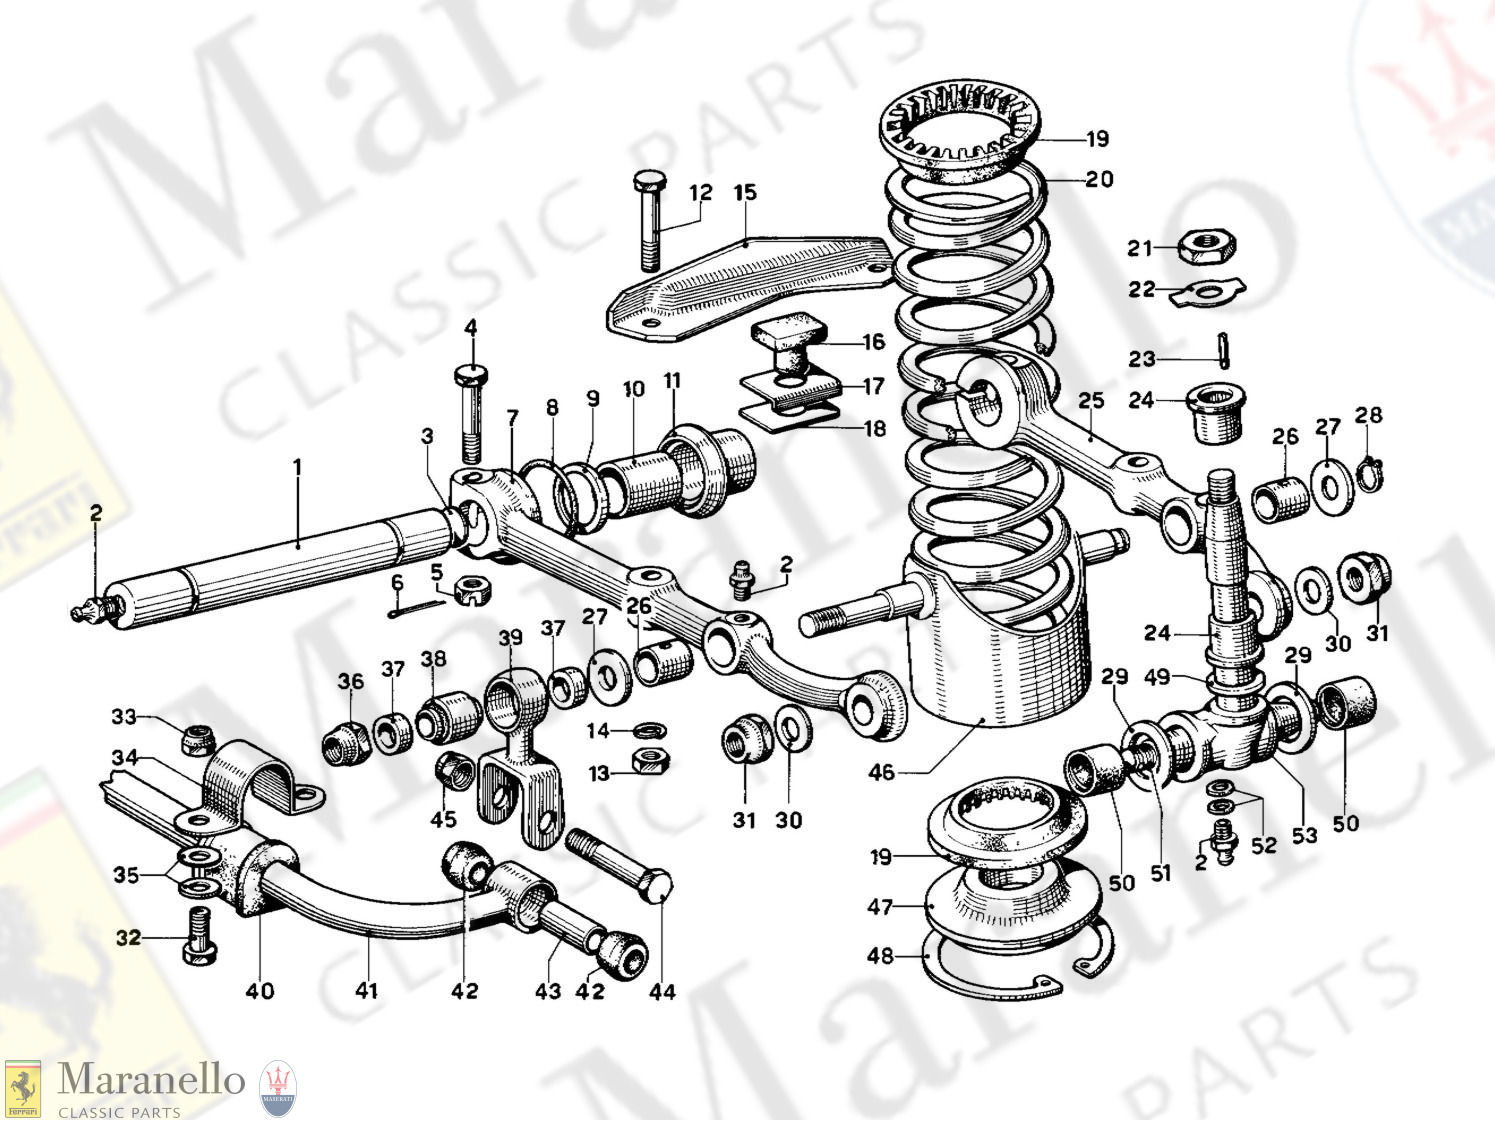 031 - Front Wheel Suspension - Bottom Arms